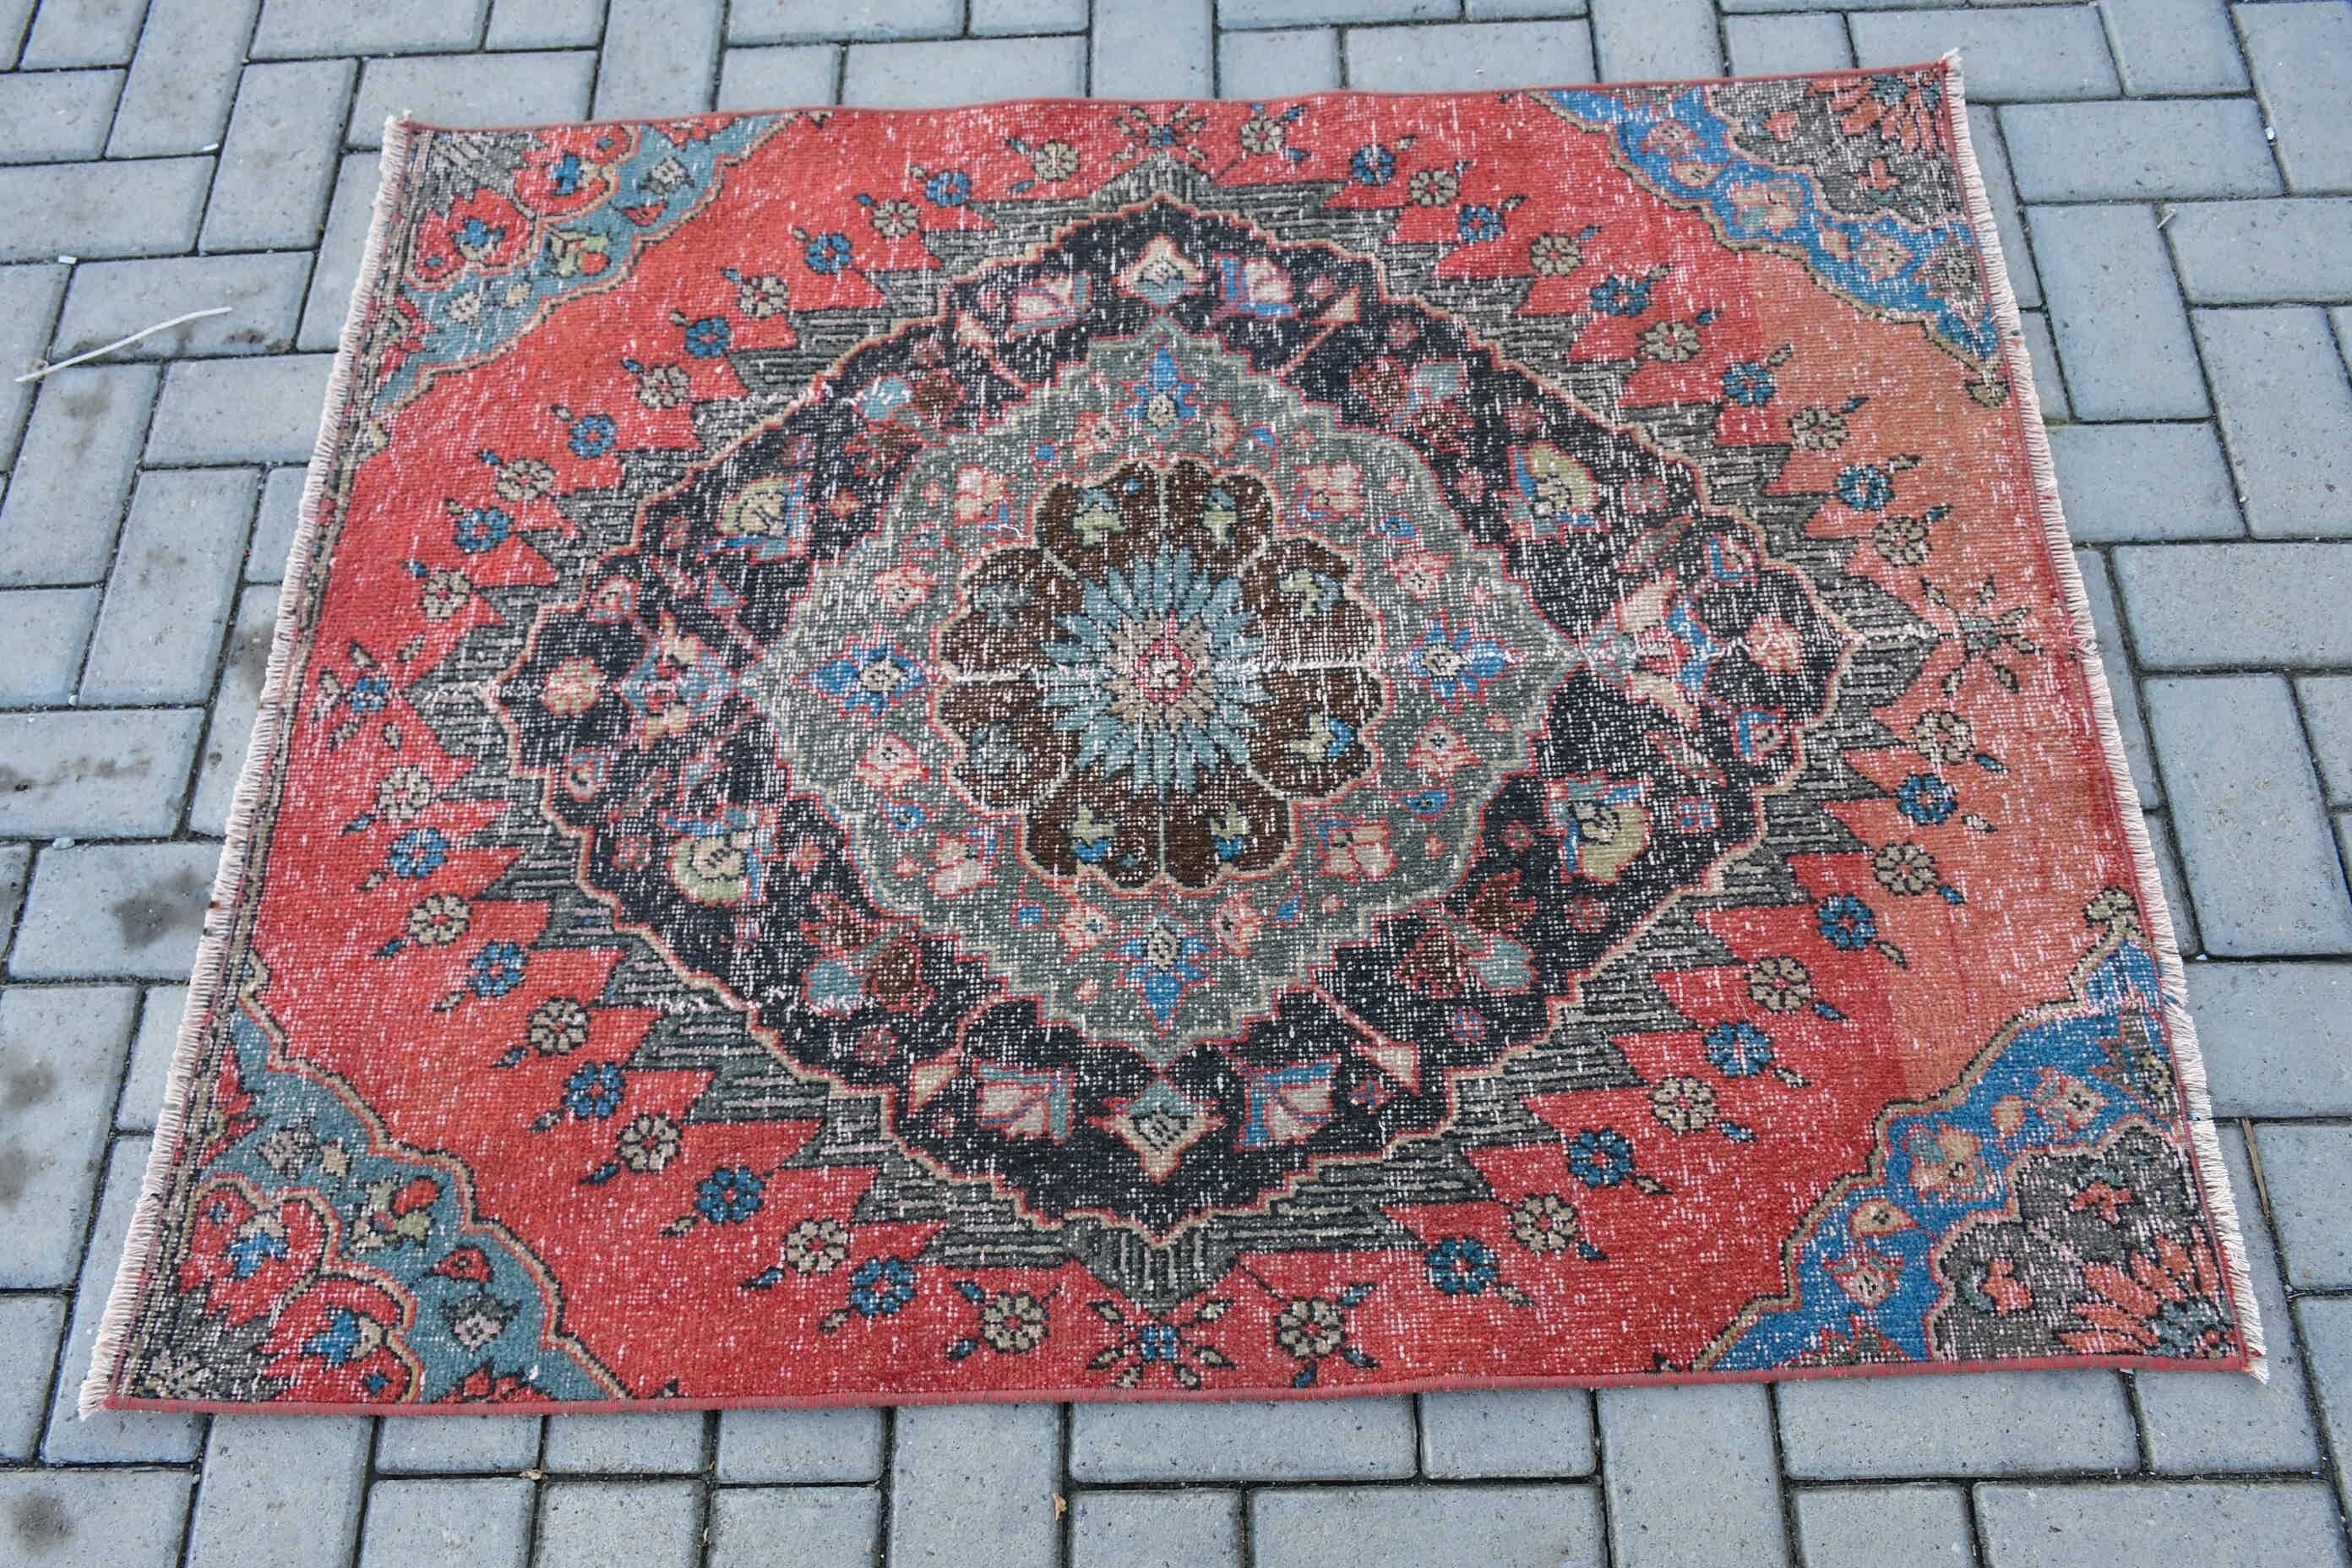 Kitchen Rugs, Rugs for Wall Hanging, Red Cool Rug, Eclectic Rug, Vintage Rugs, 3.3x4.1 ft Small Rug, Turkish Rug, Car Mat Rug